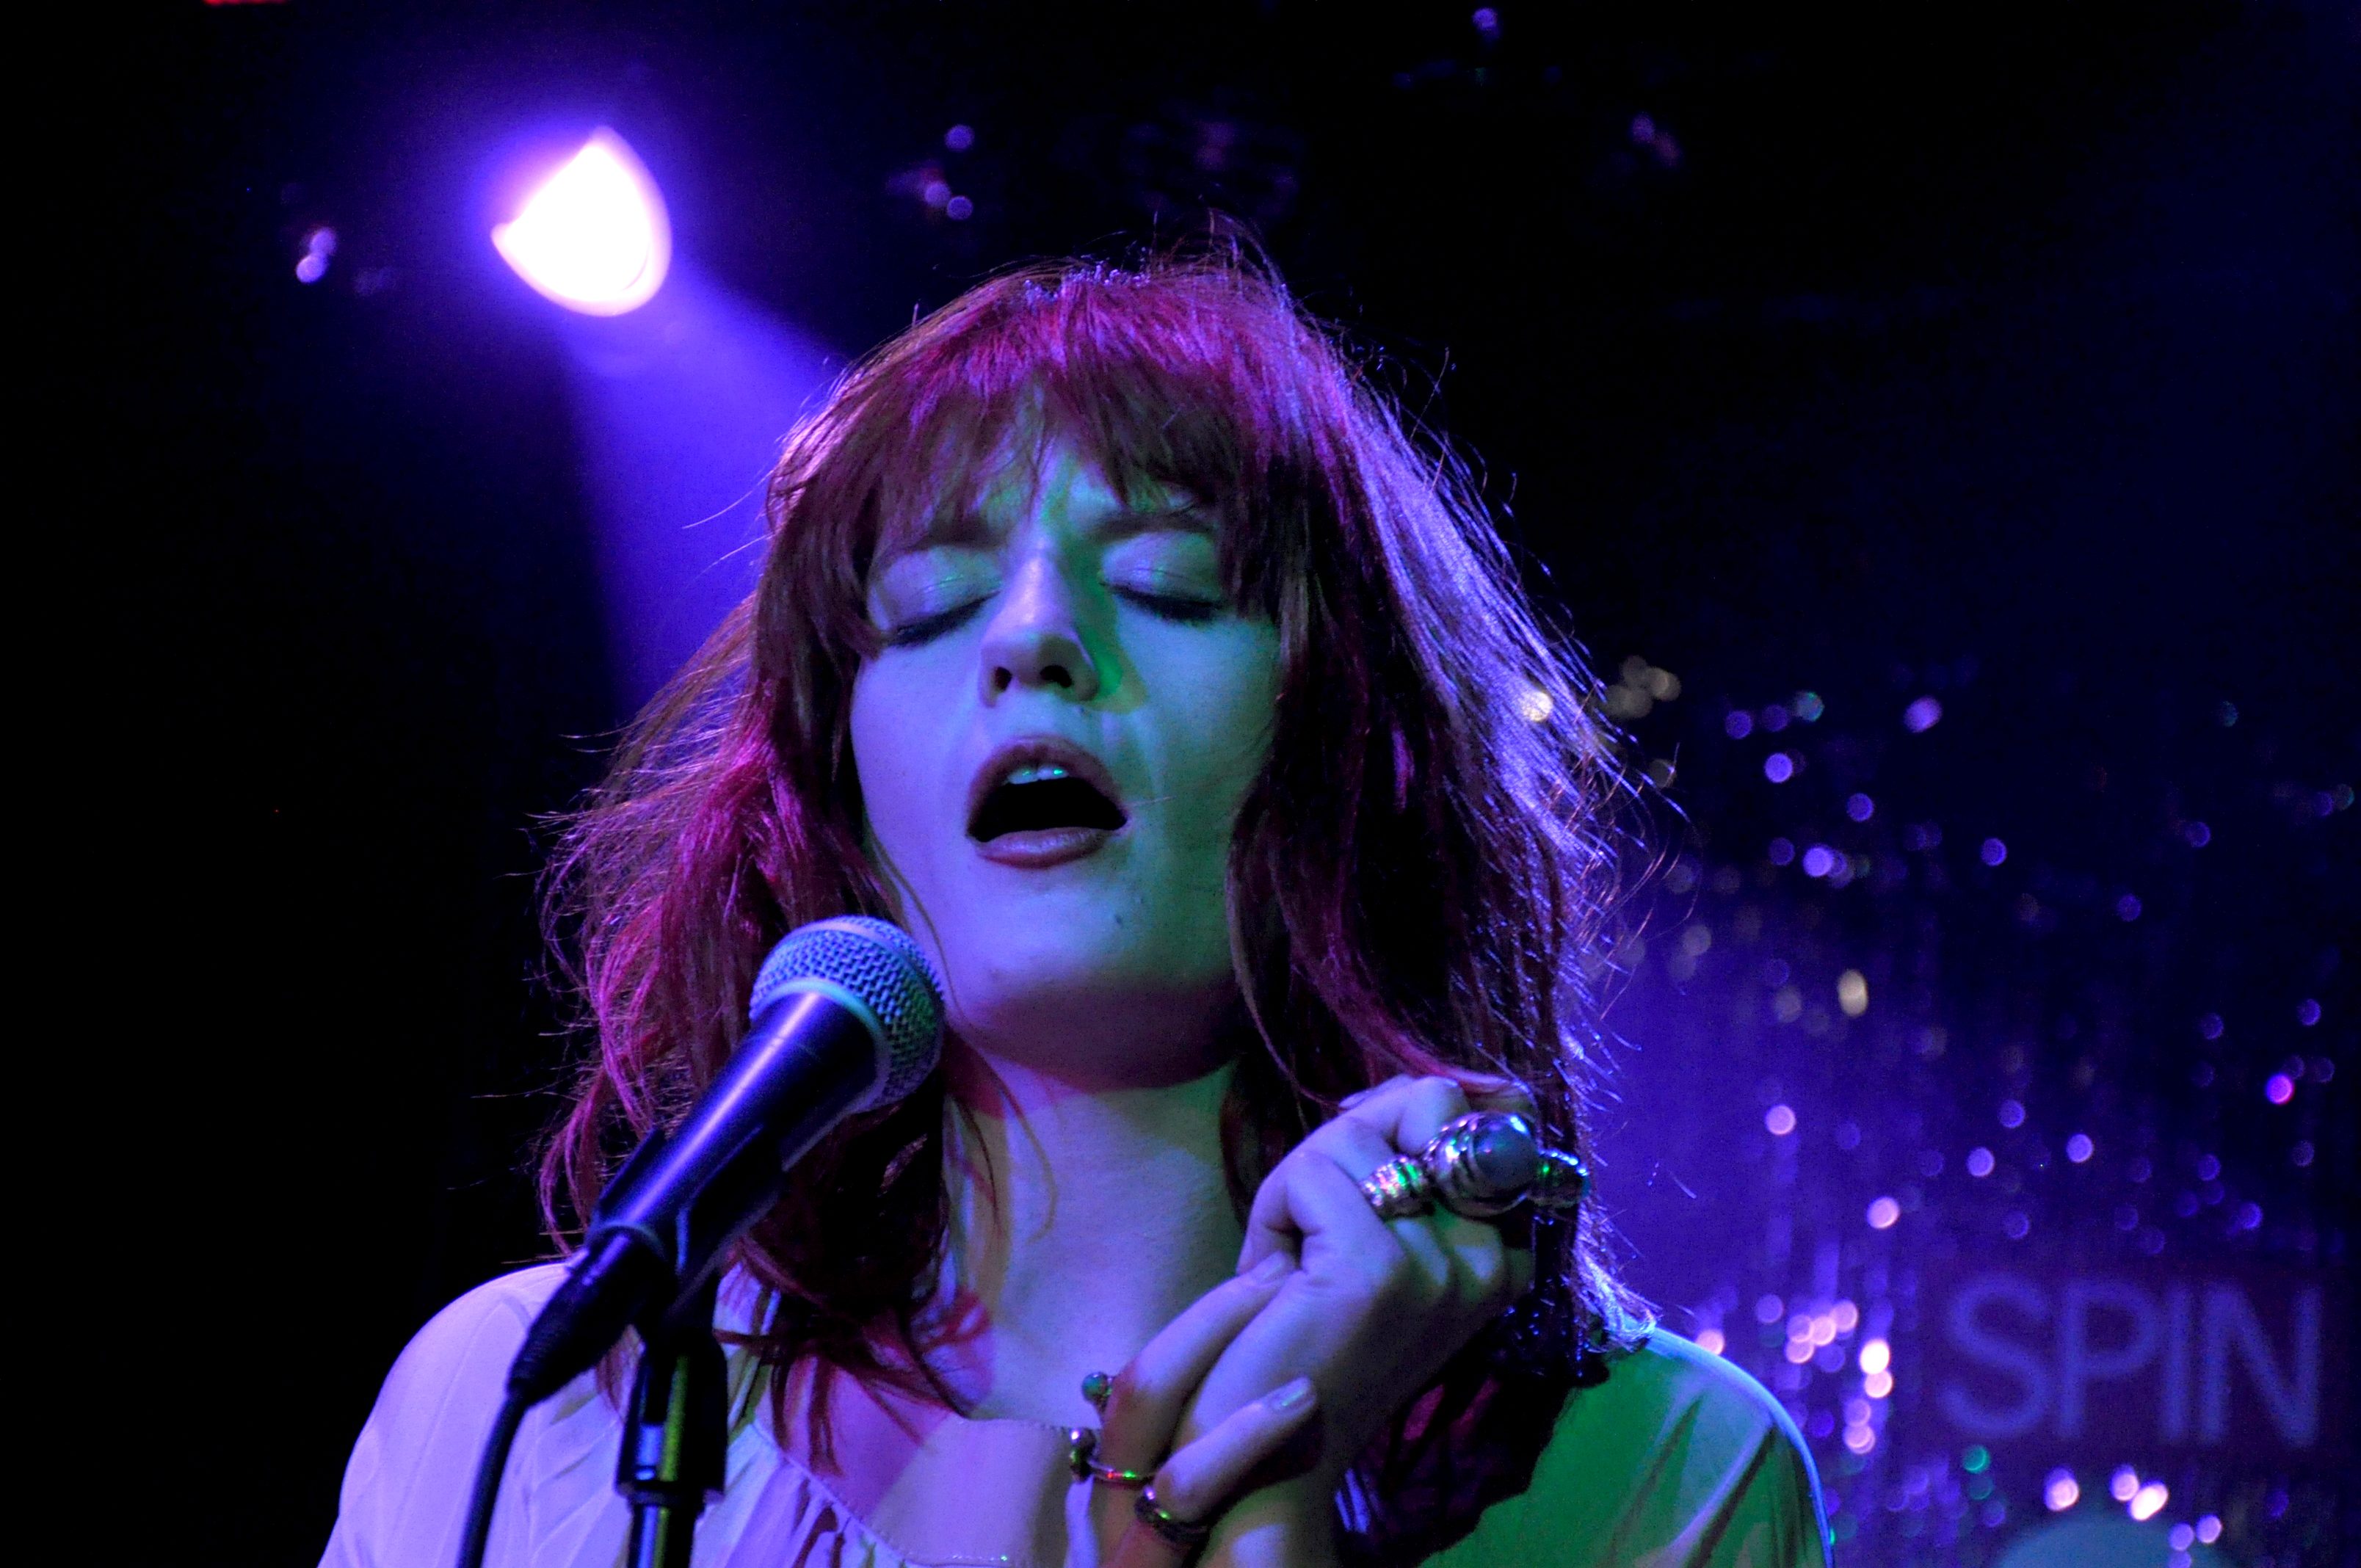 WATCH: Florence + The Machine Release New Video For “How Big, How Blue, How Beautiful”